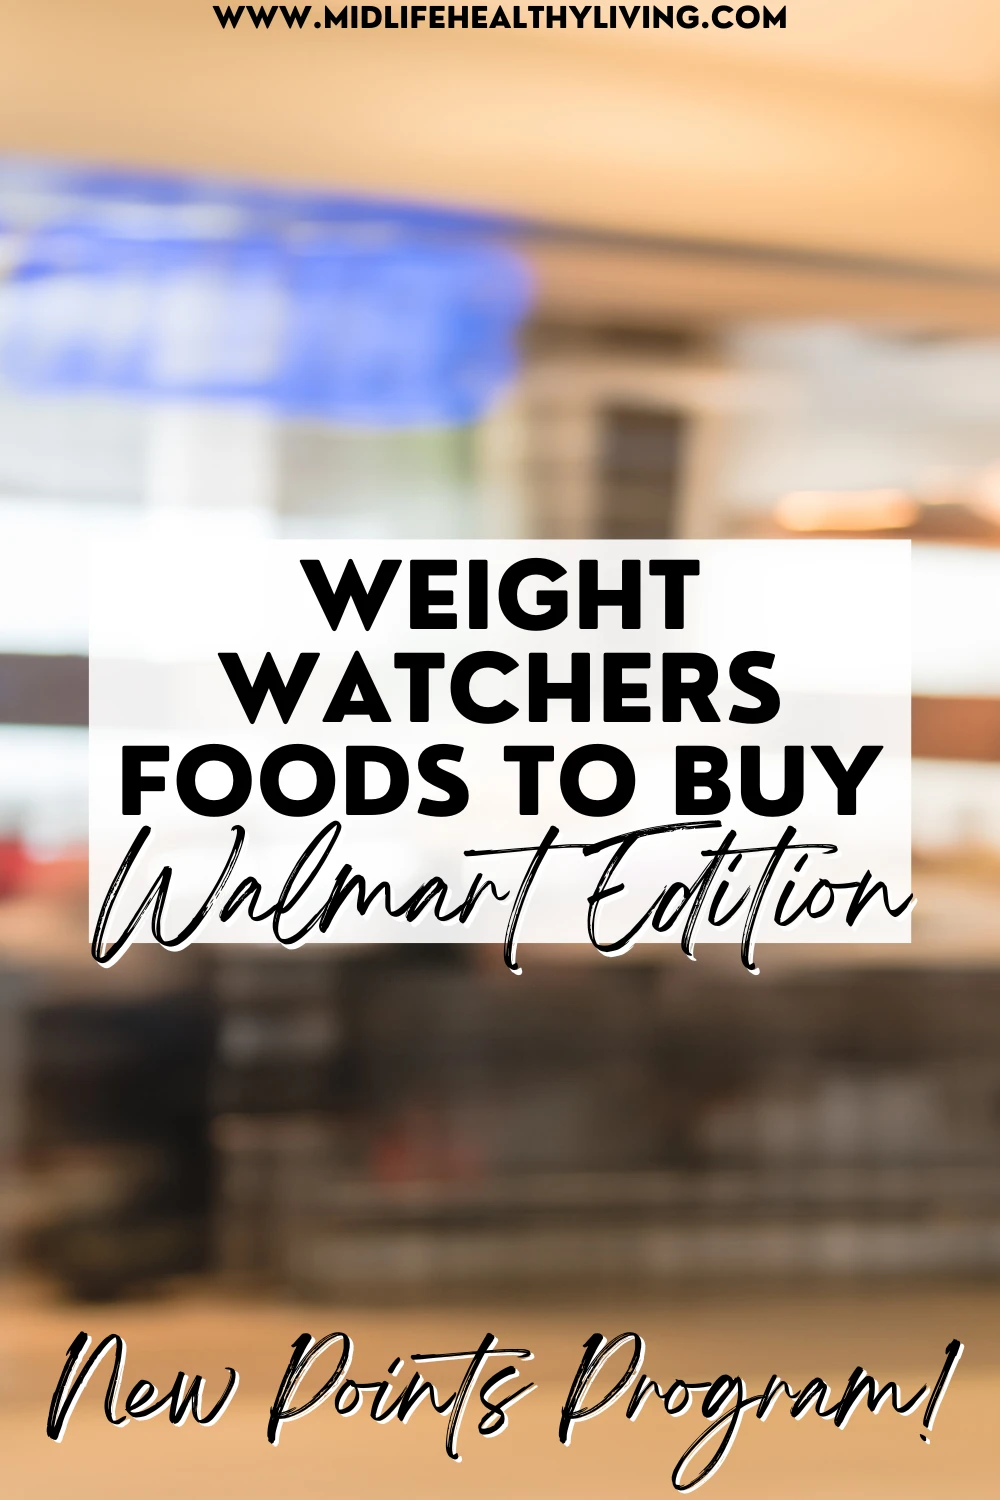 https://www.midlifehealthyliving.com/wp-content/uploads/2020/04/Weight-Watchers-Foods-To-Buy-From-Walmart-Pin.png.webp